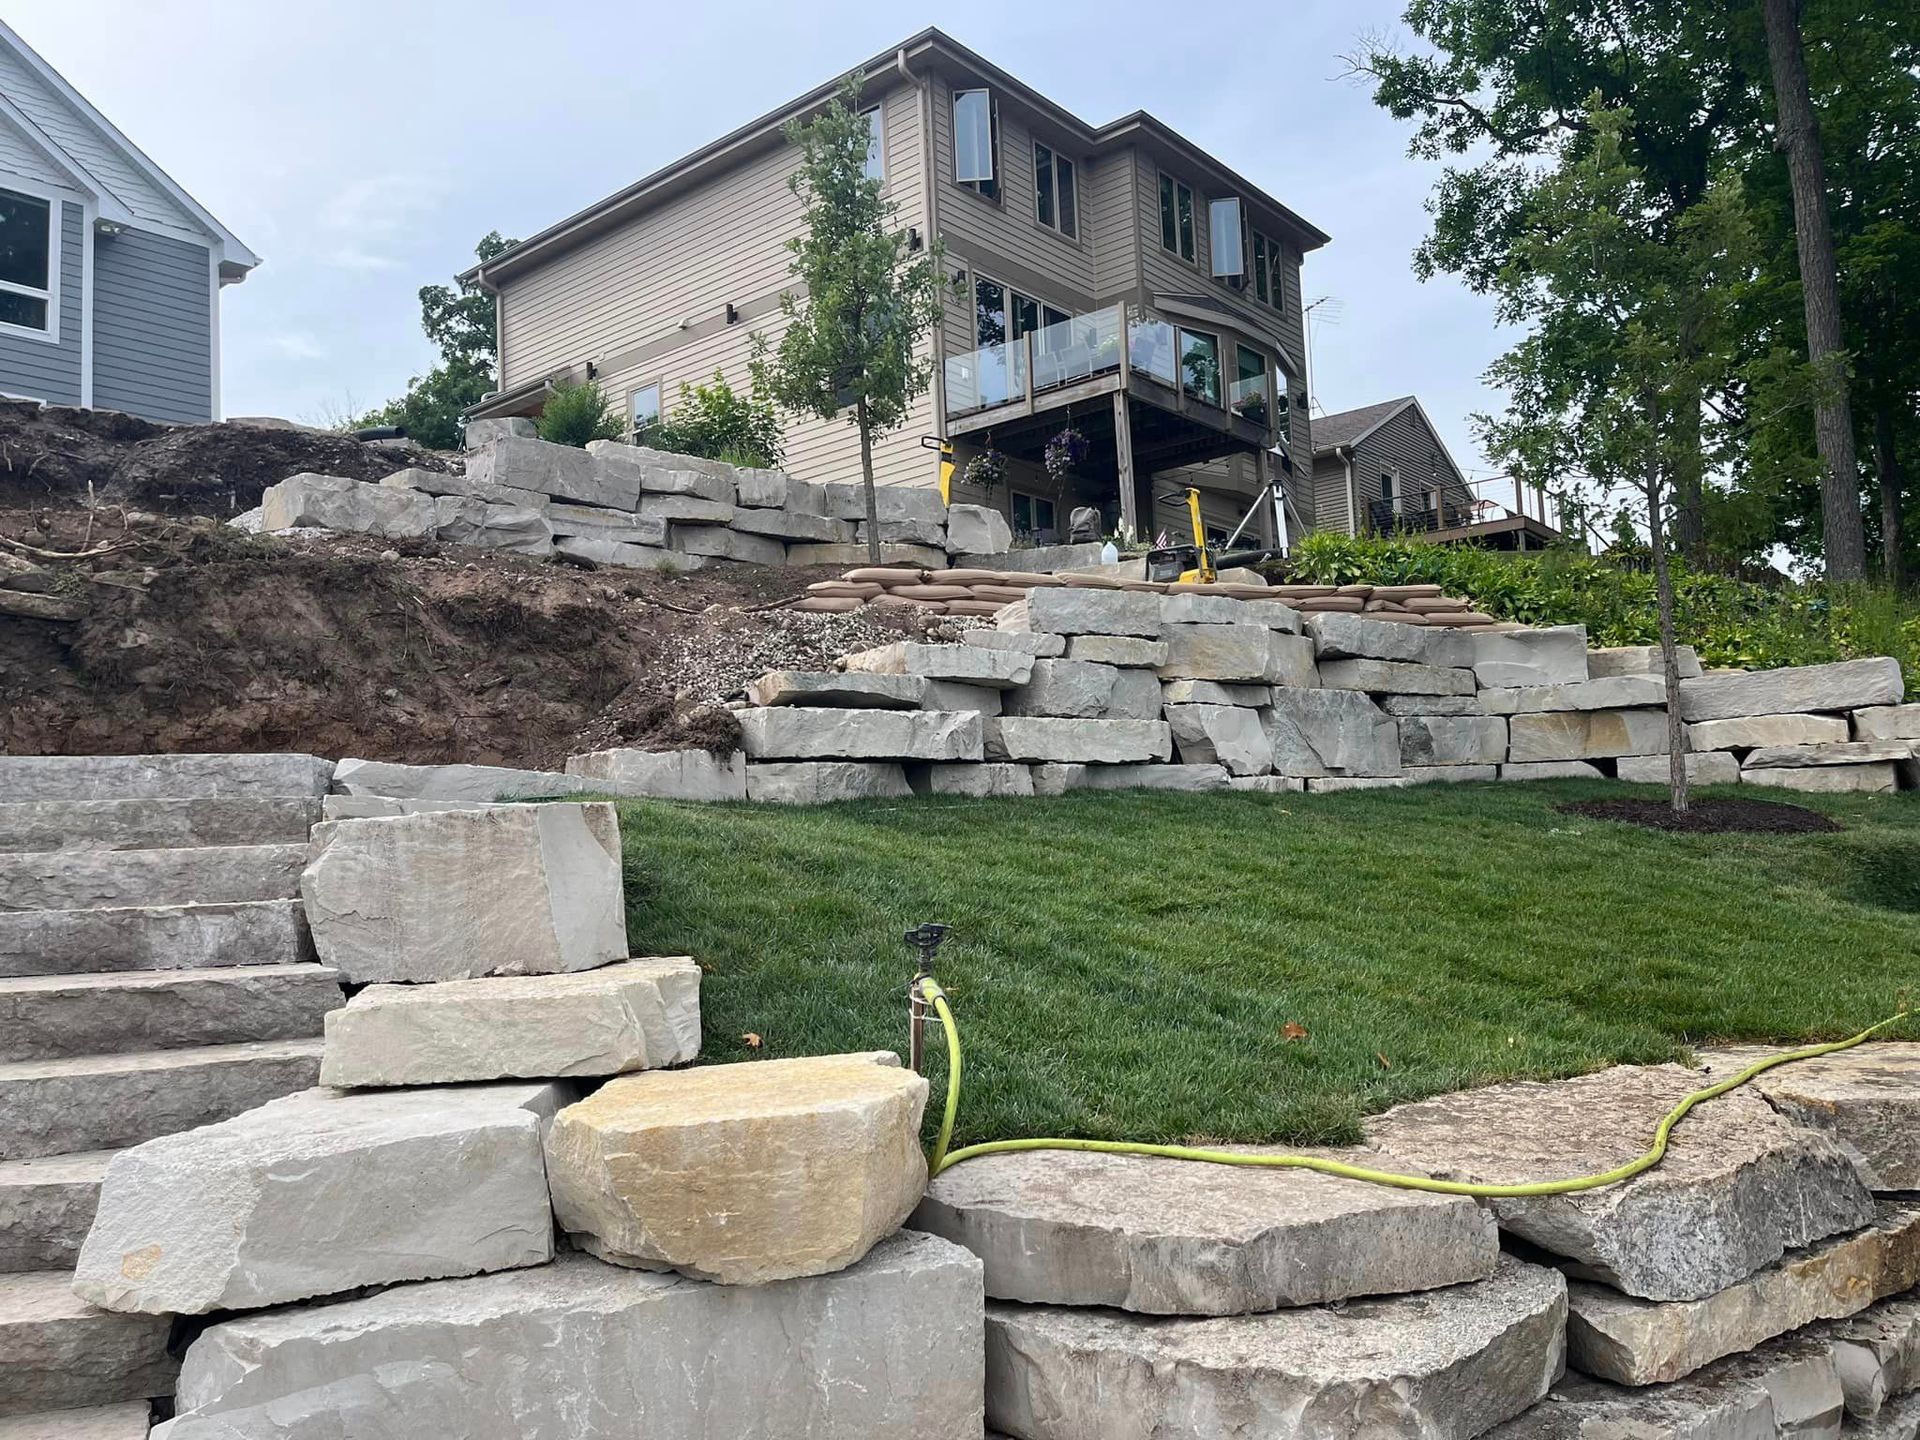 Hardscape project with natural stone leading to entrance of home